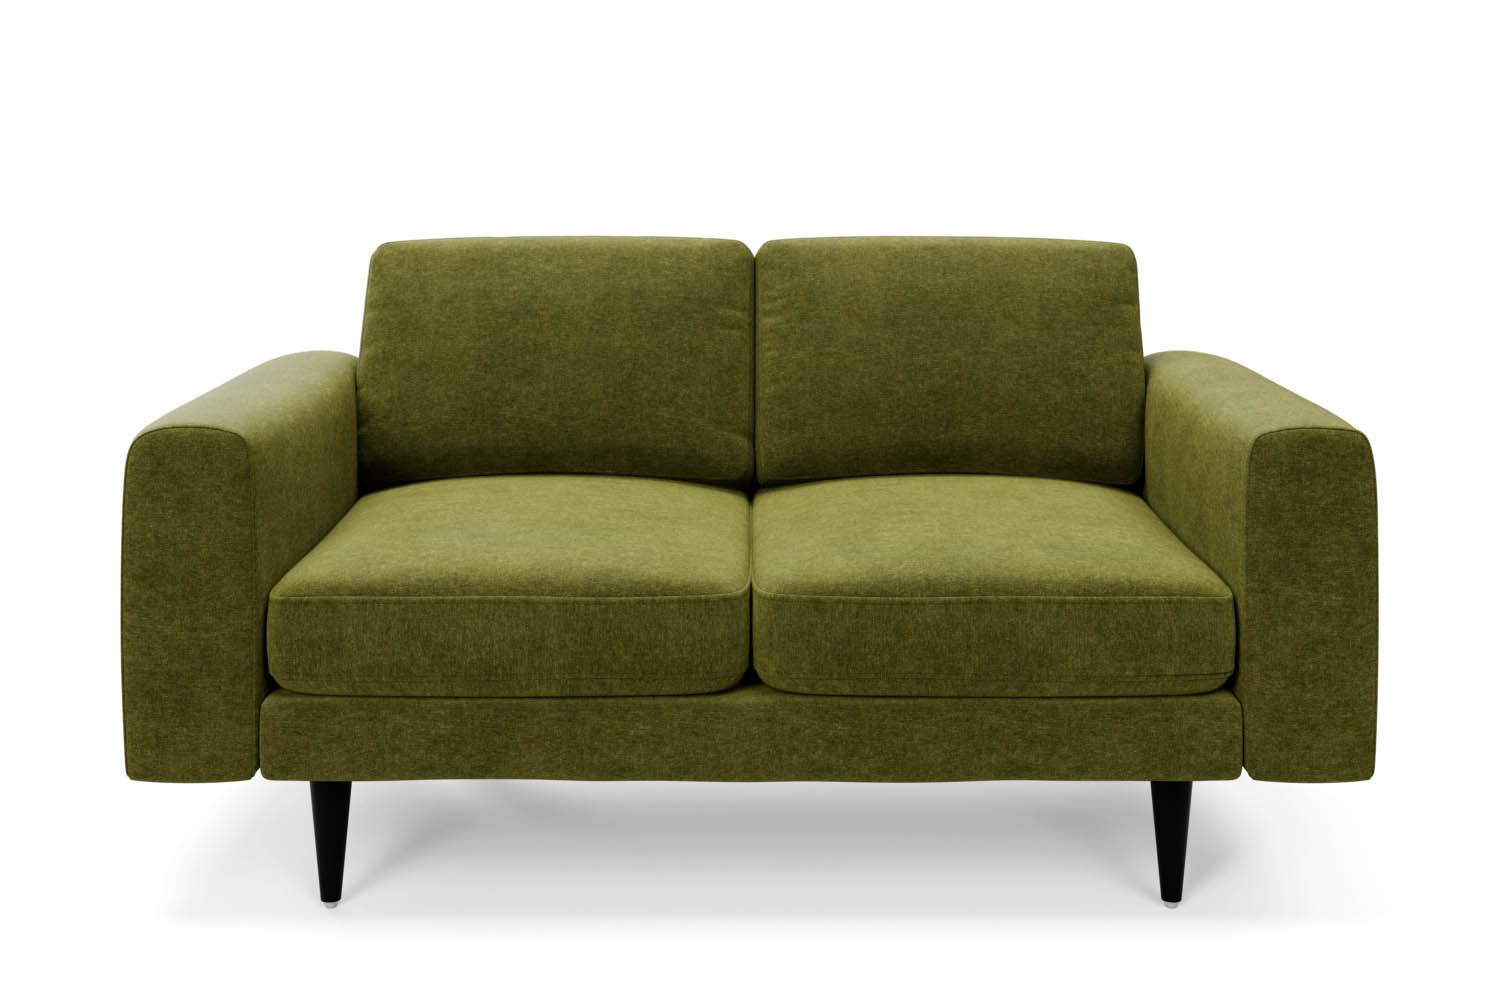 The Big Chill 2 Seater Sofa in Moss Chenille with black legs front variant_40886287368240